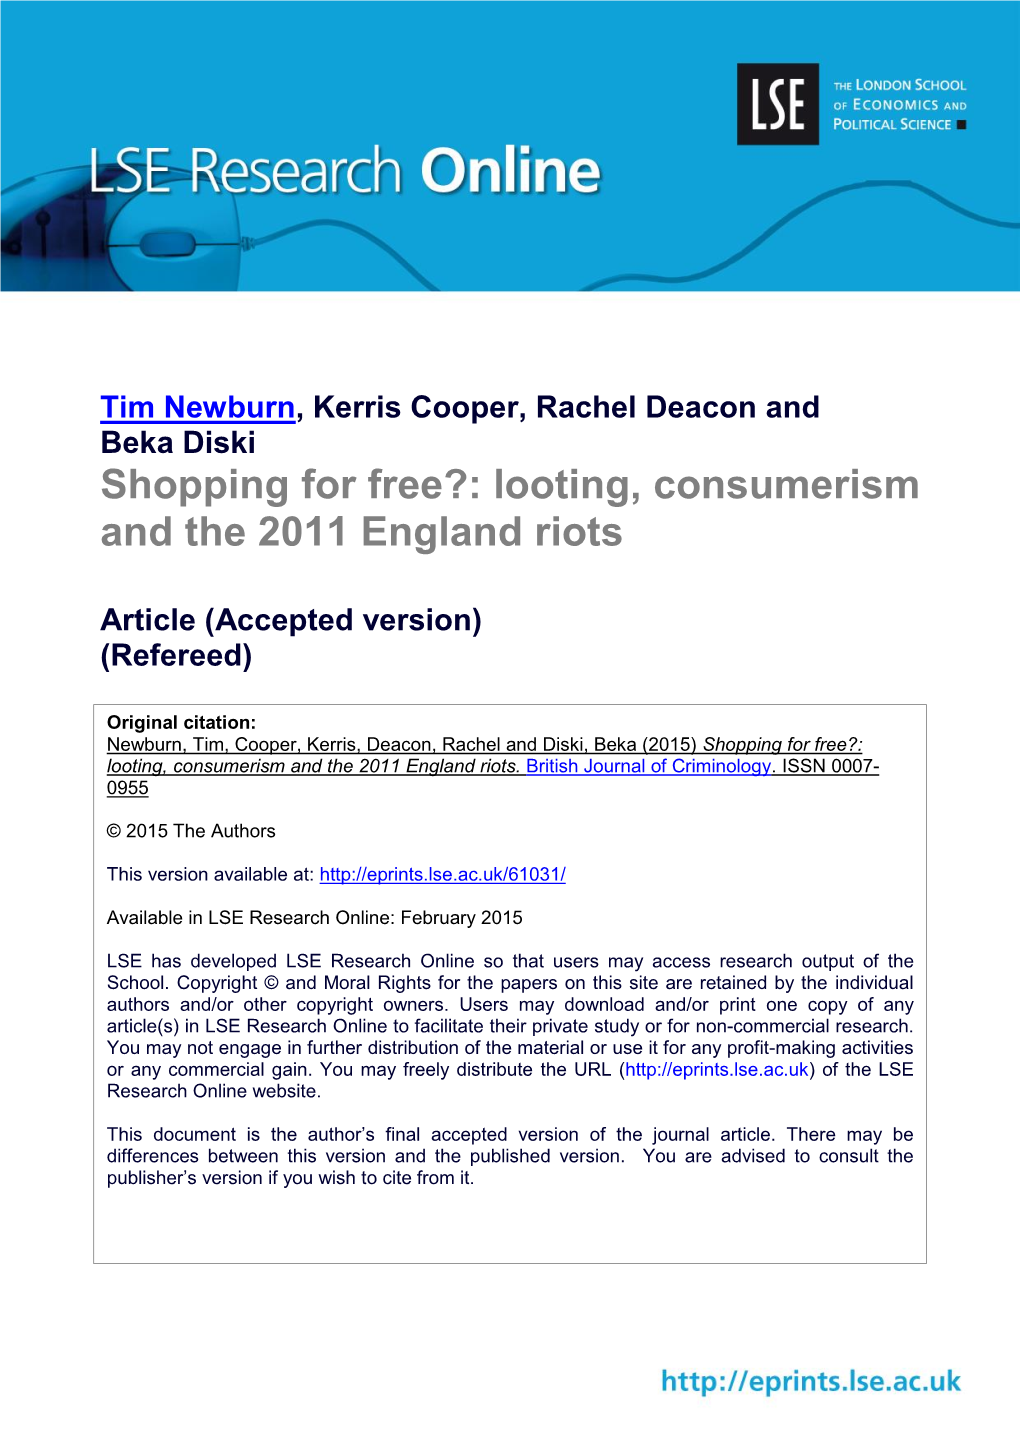 Shopping for Free?: Looting, Consumerism and the 2011 England Riots